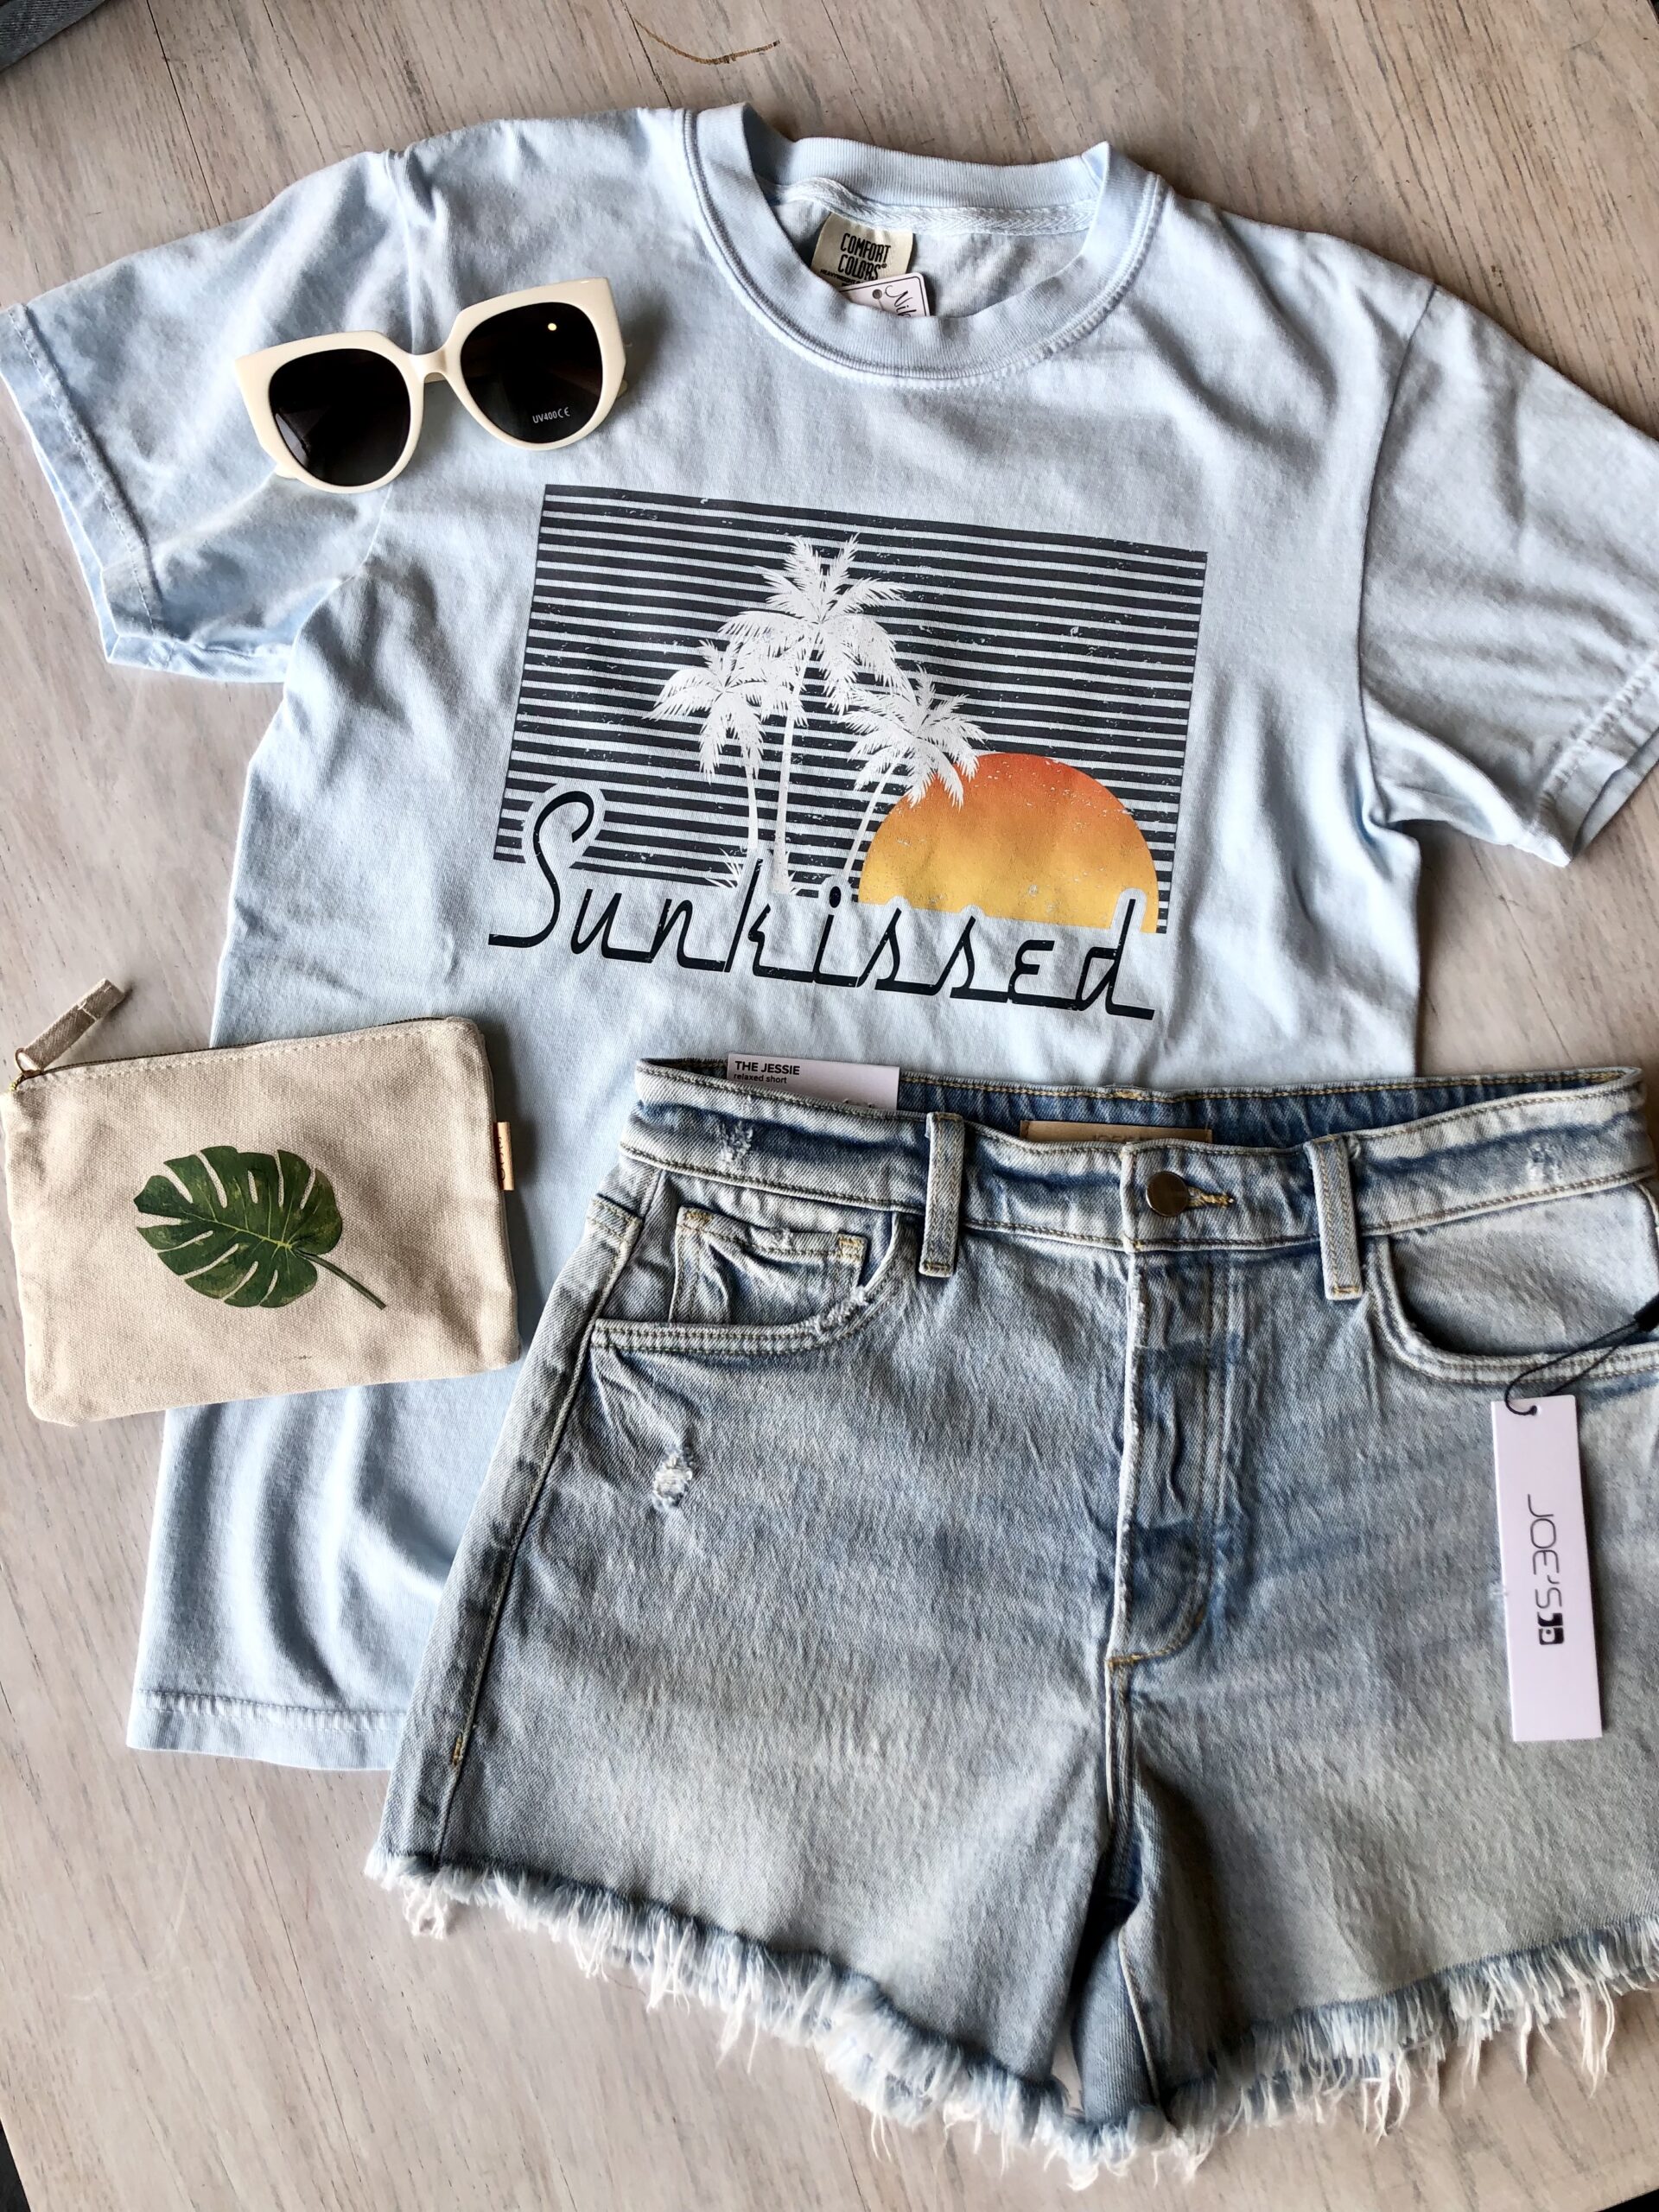 Sunkissed Graphic Tee